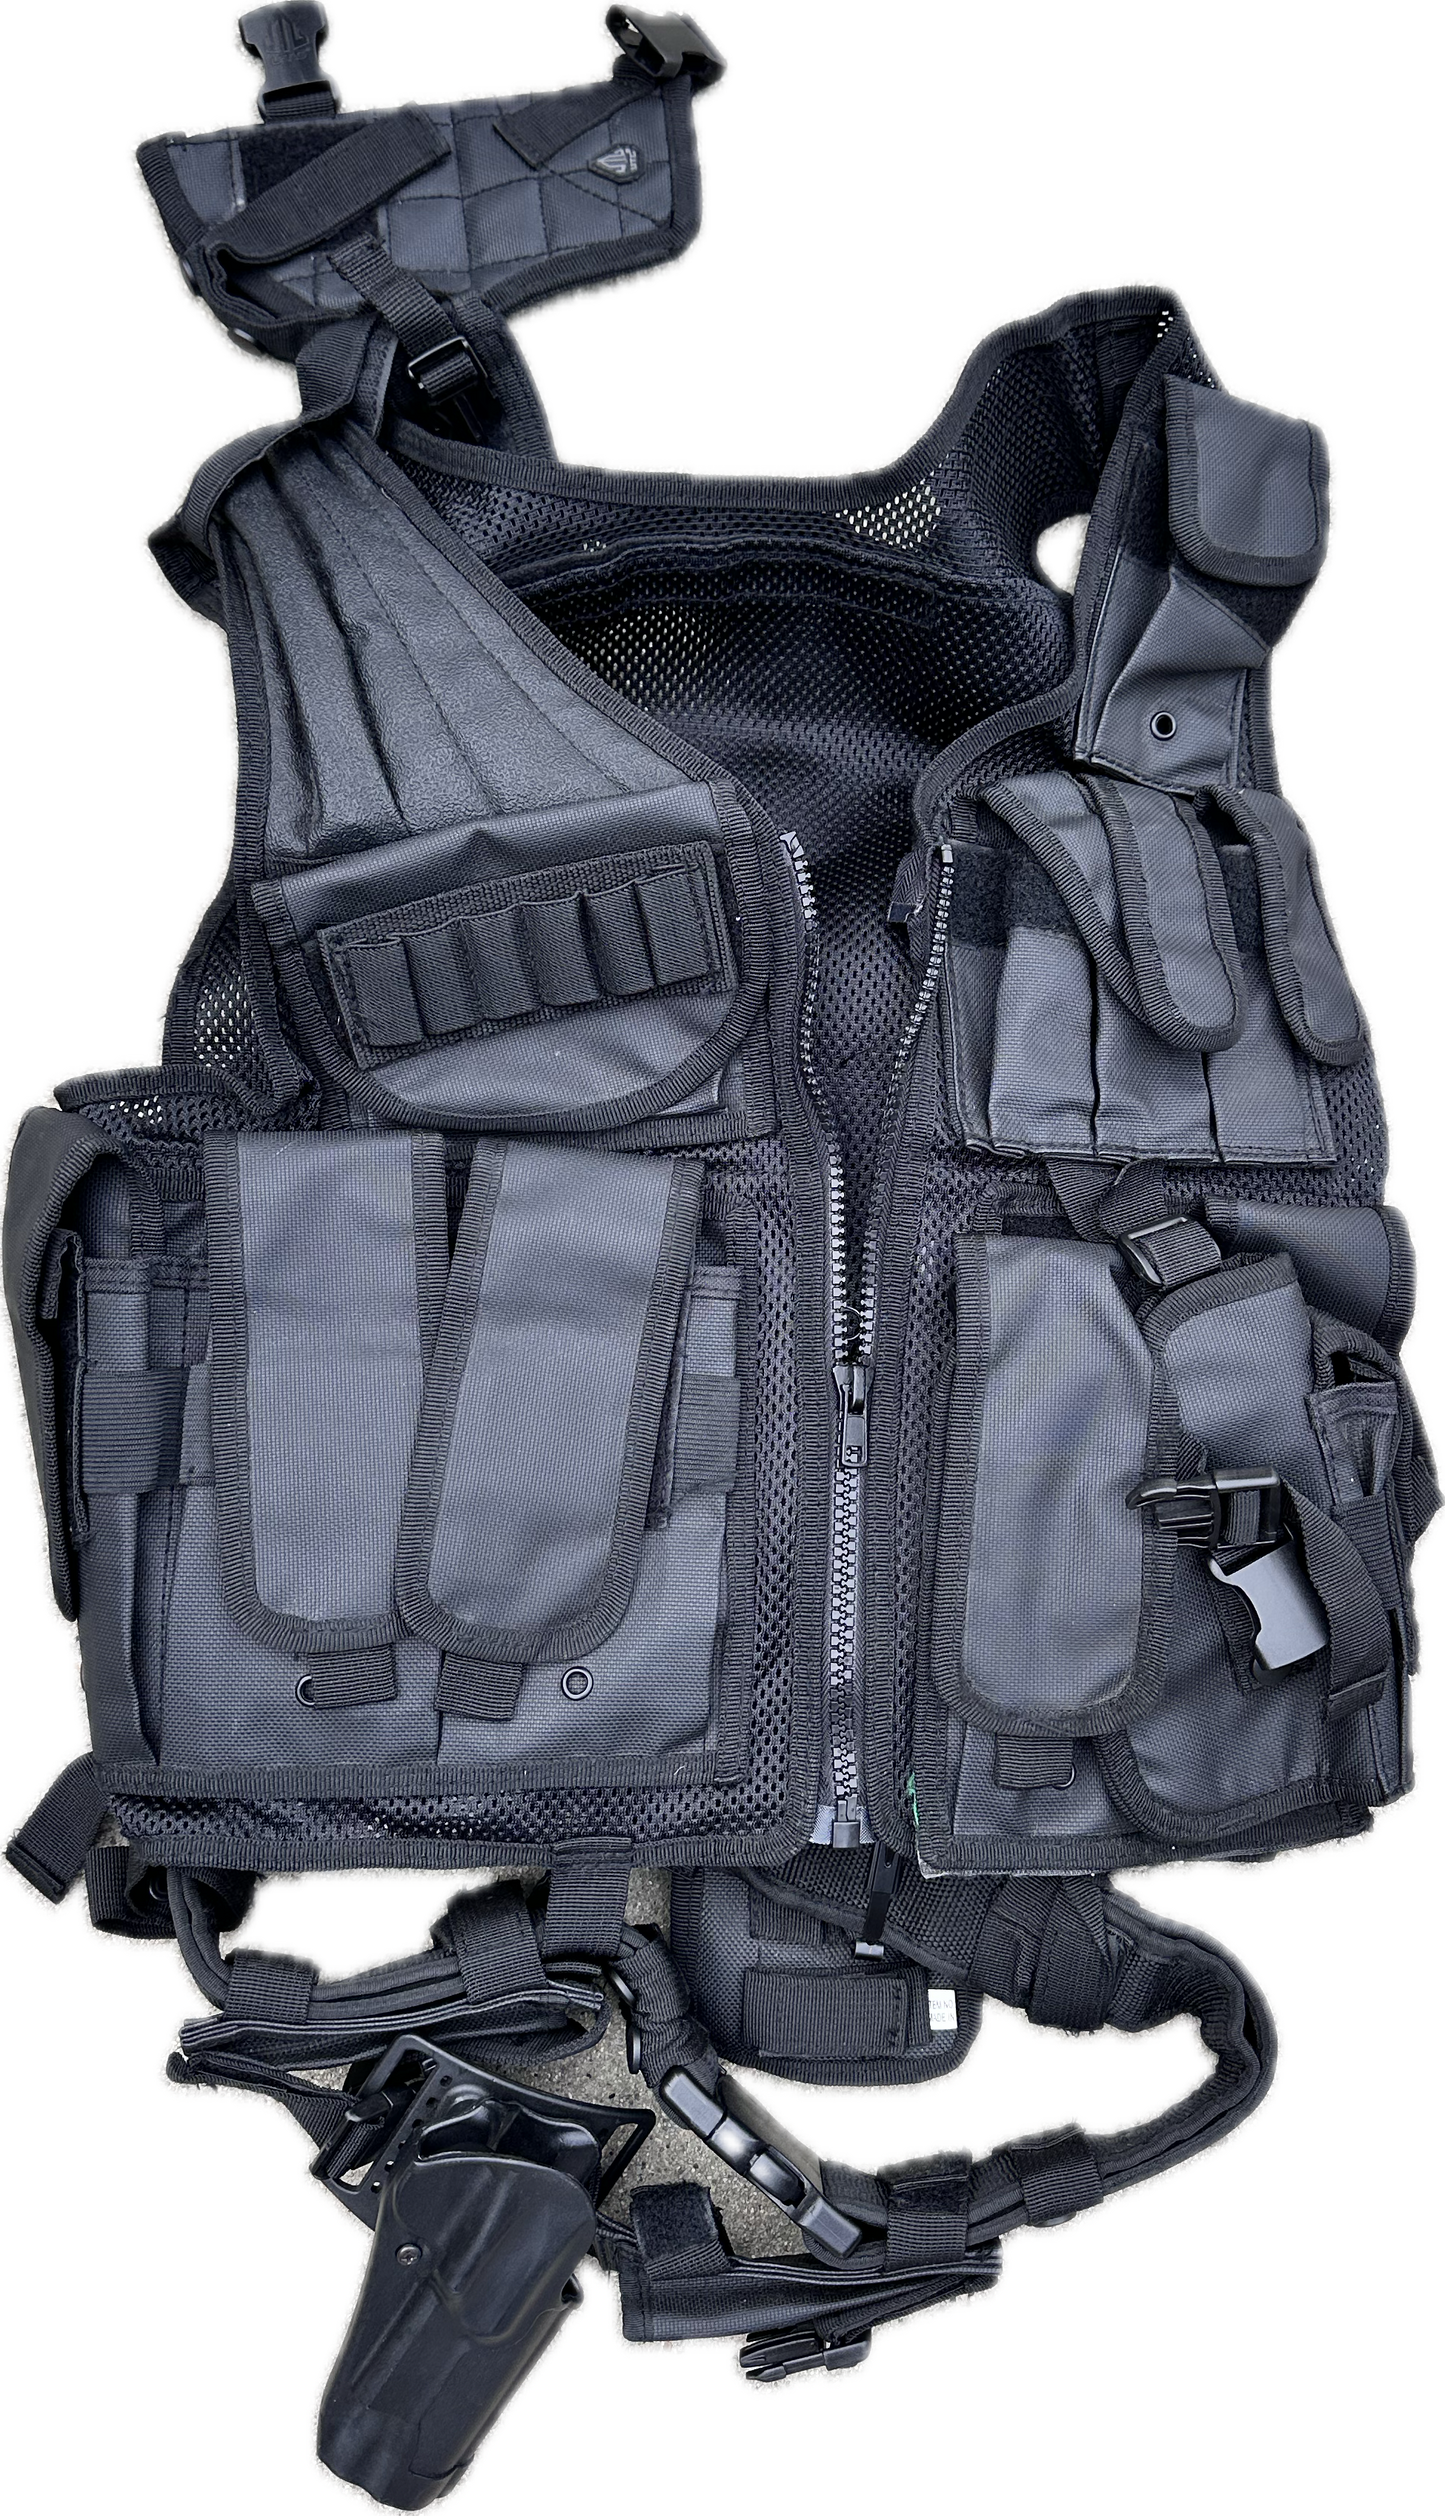 SONS OF ANARCHY: Jax Teller Bulletproof Tactical Vest with Holsters, Gun Carriers & Ammunition Pouches